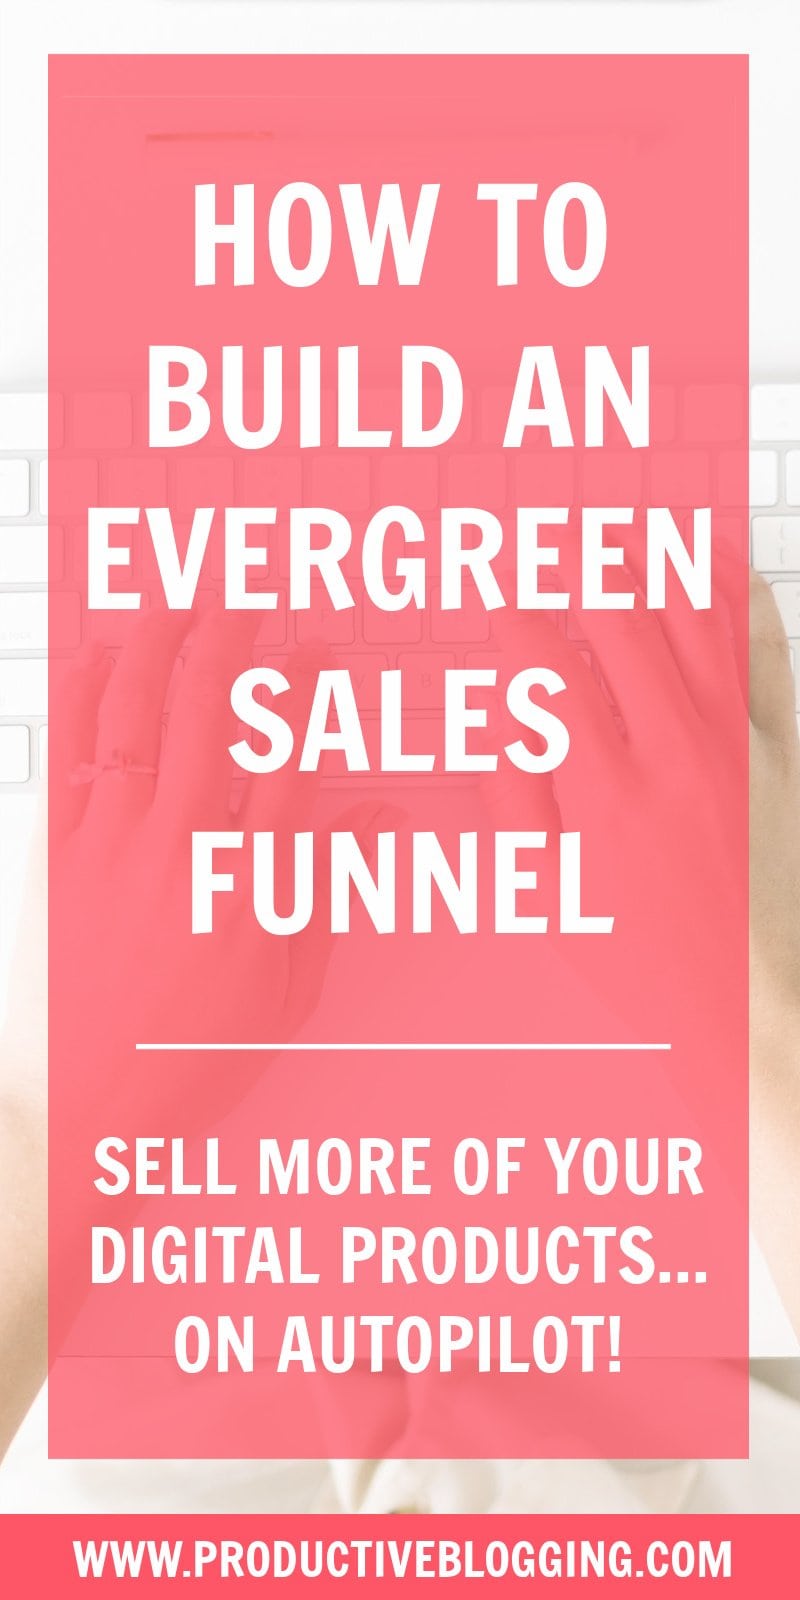 Want to sell your digital products on autopilot so you can earn more but work less? Then you need to build an evergreen sales funnel! #salesfunnel #evergreensalesfunnel #evergreenfunnel #emailmarketing #makemoneyblogging #monetizeyourblog #passiveincome #blogginglife #bloglife #blog #blogging #blogger #professionalblogger #bloggingismyjob #solopreneur #mompreneur #fempreneur #bloggingbiz #bloggingtips #productivitytips #productivity #blogsmarternotharder #productiveblogging